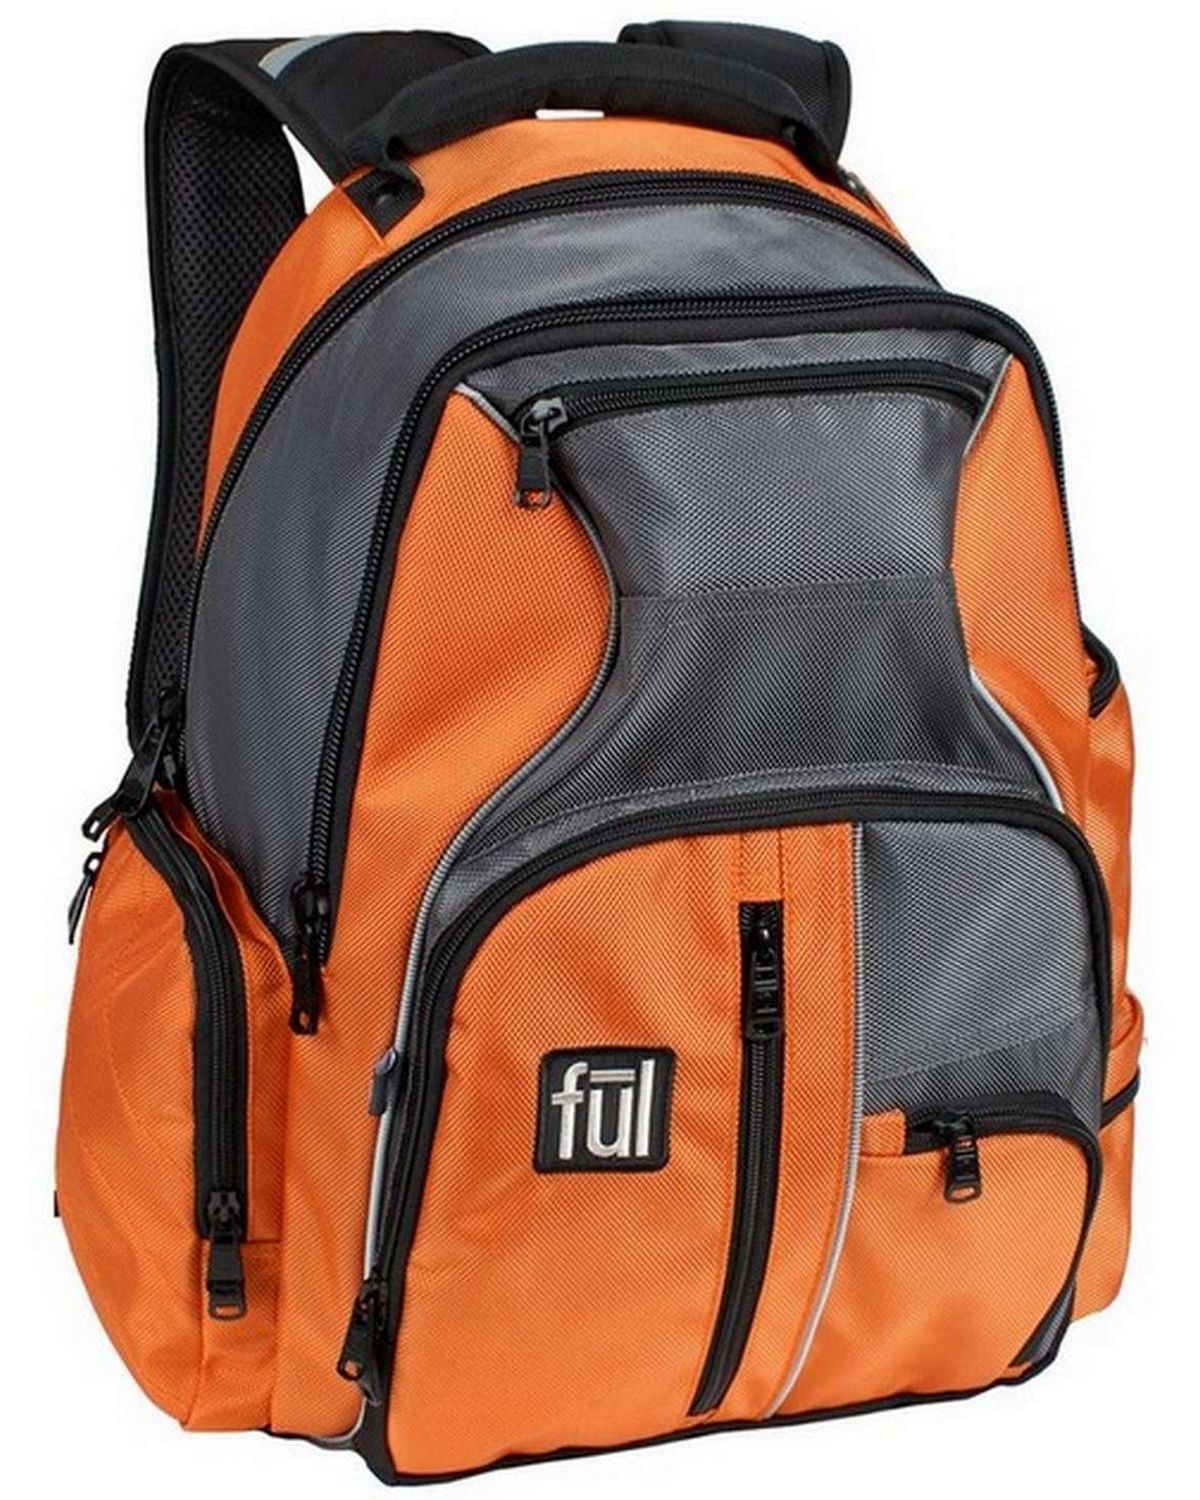 FUL TG5094 Gibson Laptop Backpack - Free Shipping Available